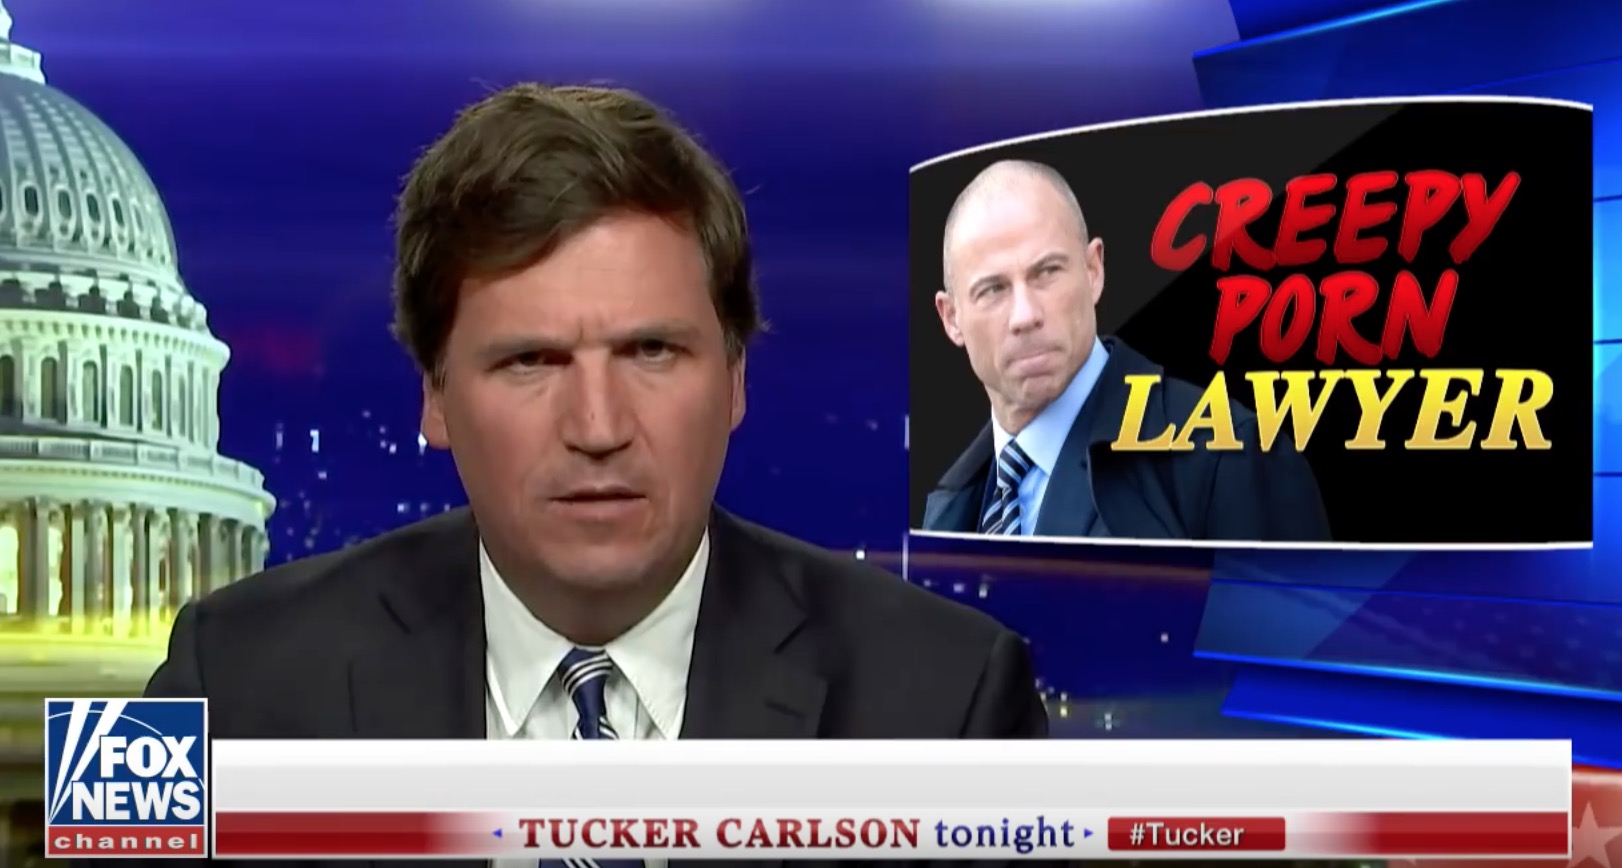 Tucker Carlson Refuses to Stop Calling Michael Avenatti 'Creepy Porn Lawyer'  in Exchange for Interview